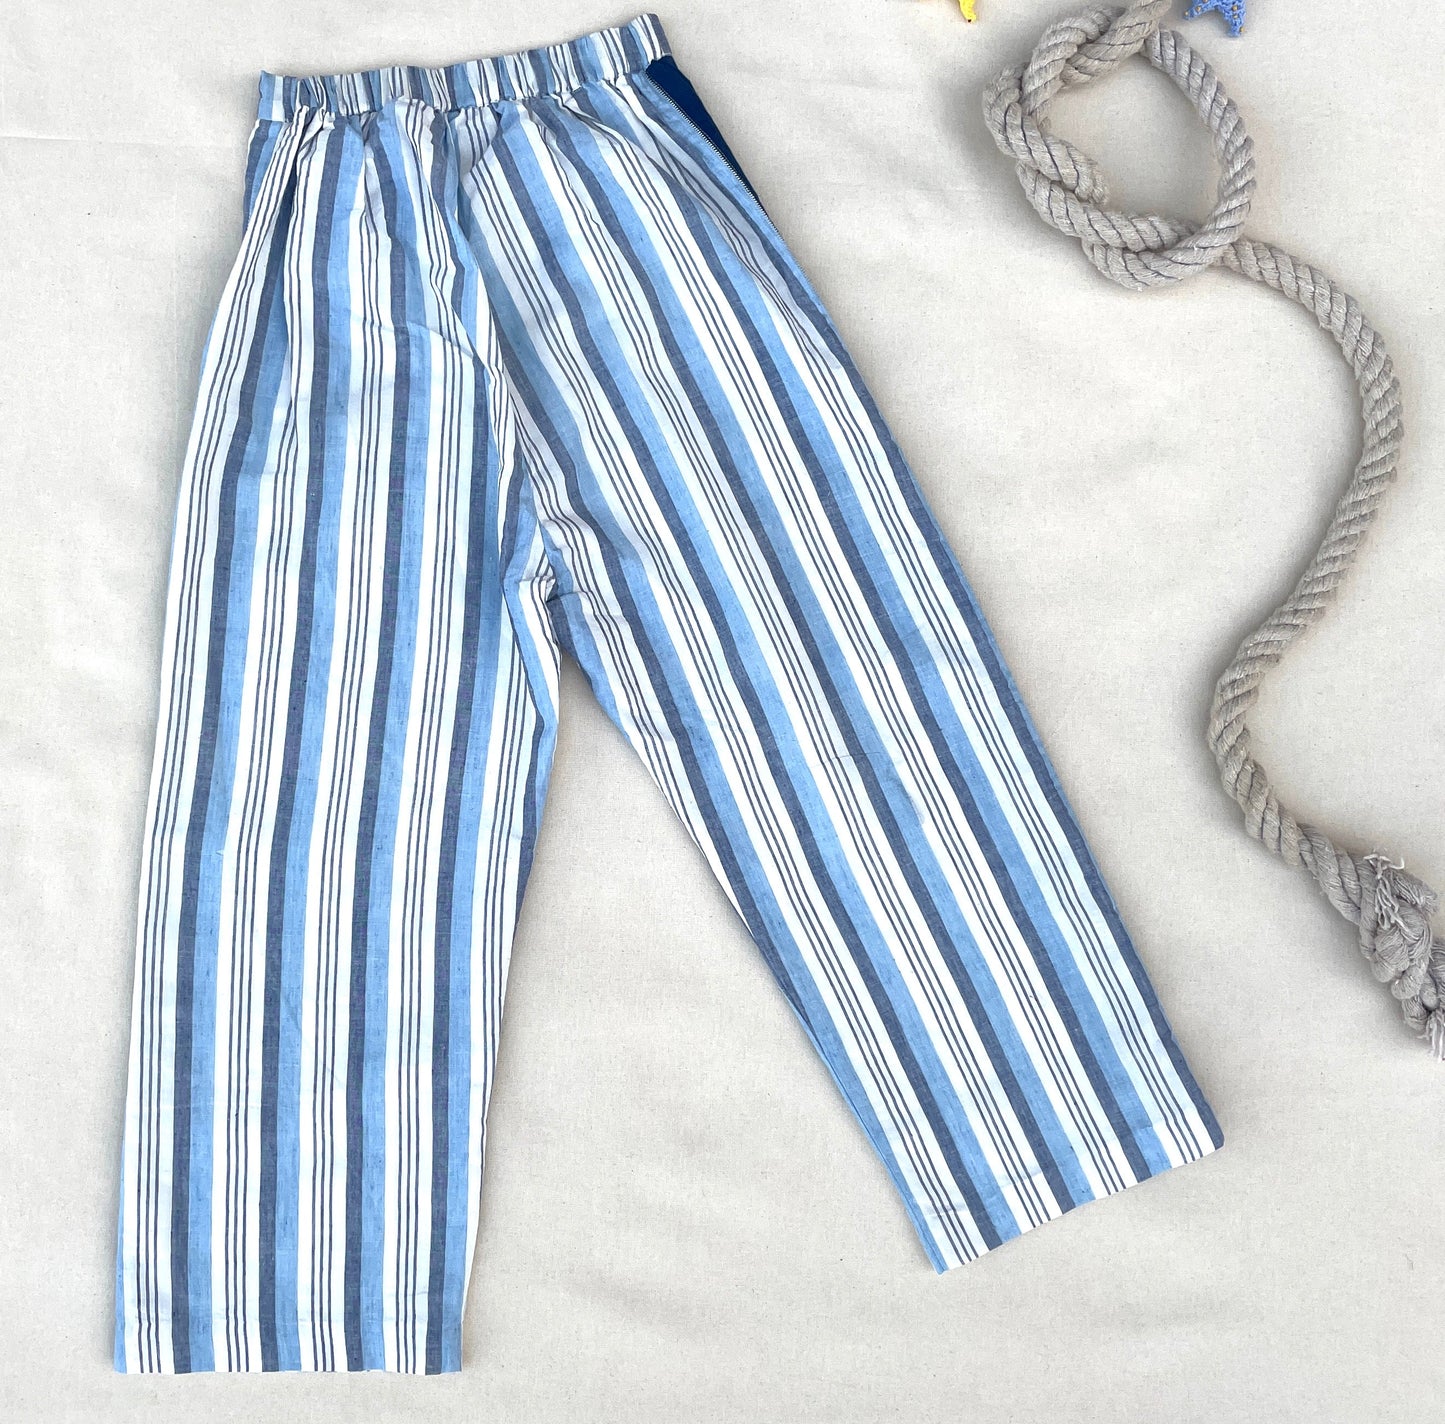 Harbour Trousers